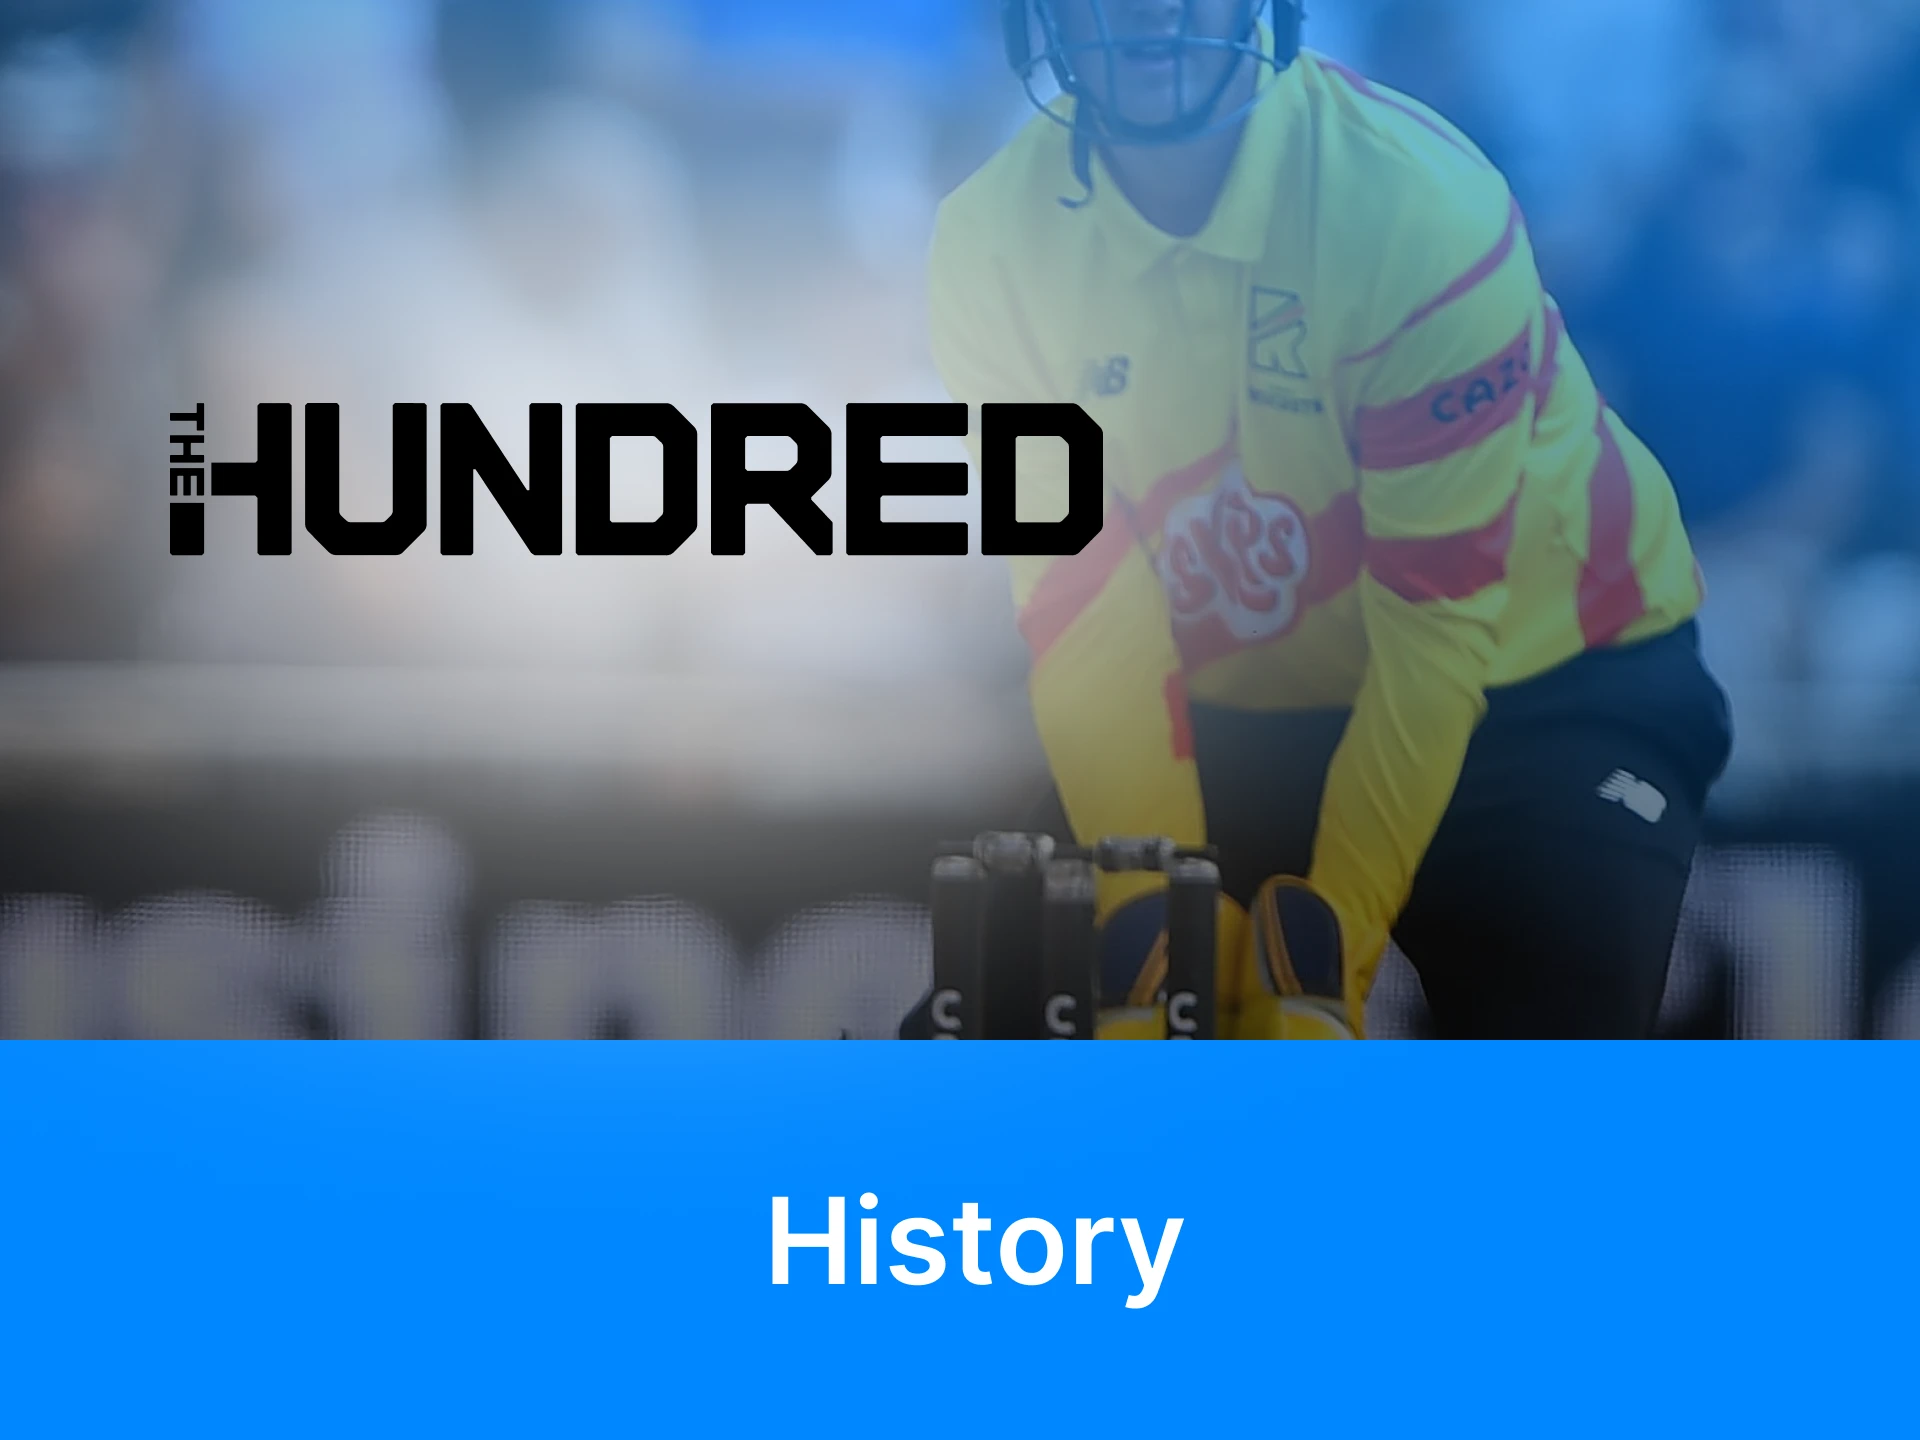 The Hundred tournament has a rich history.